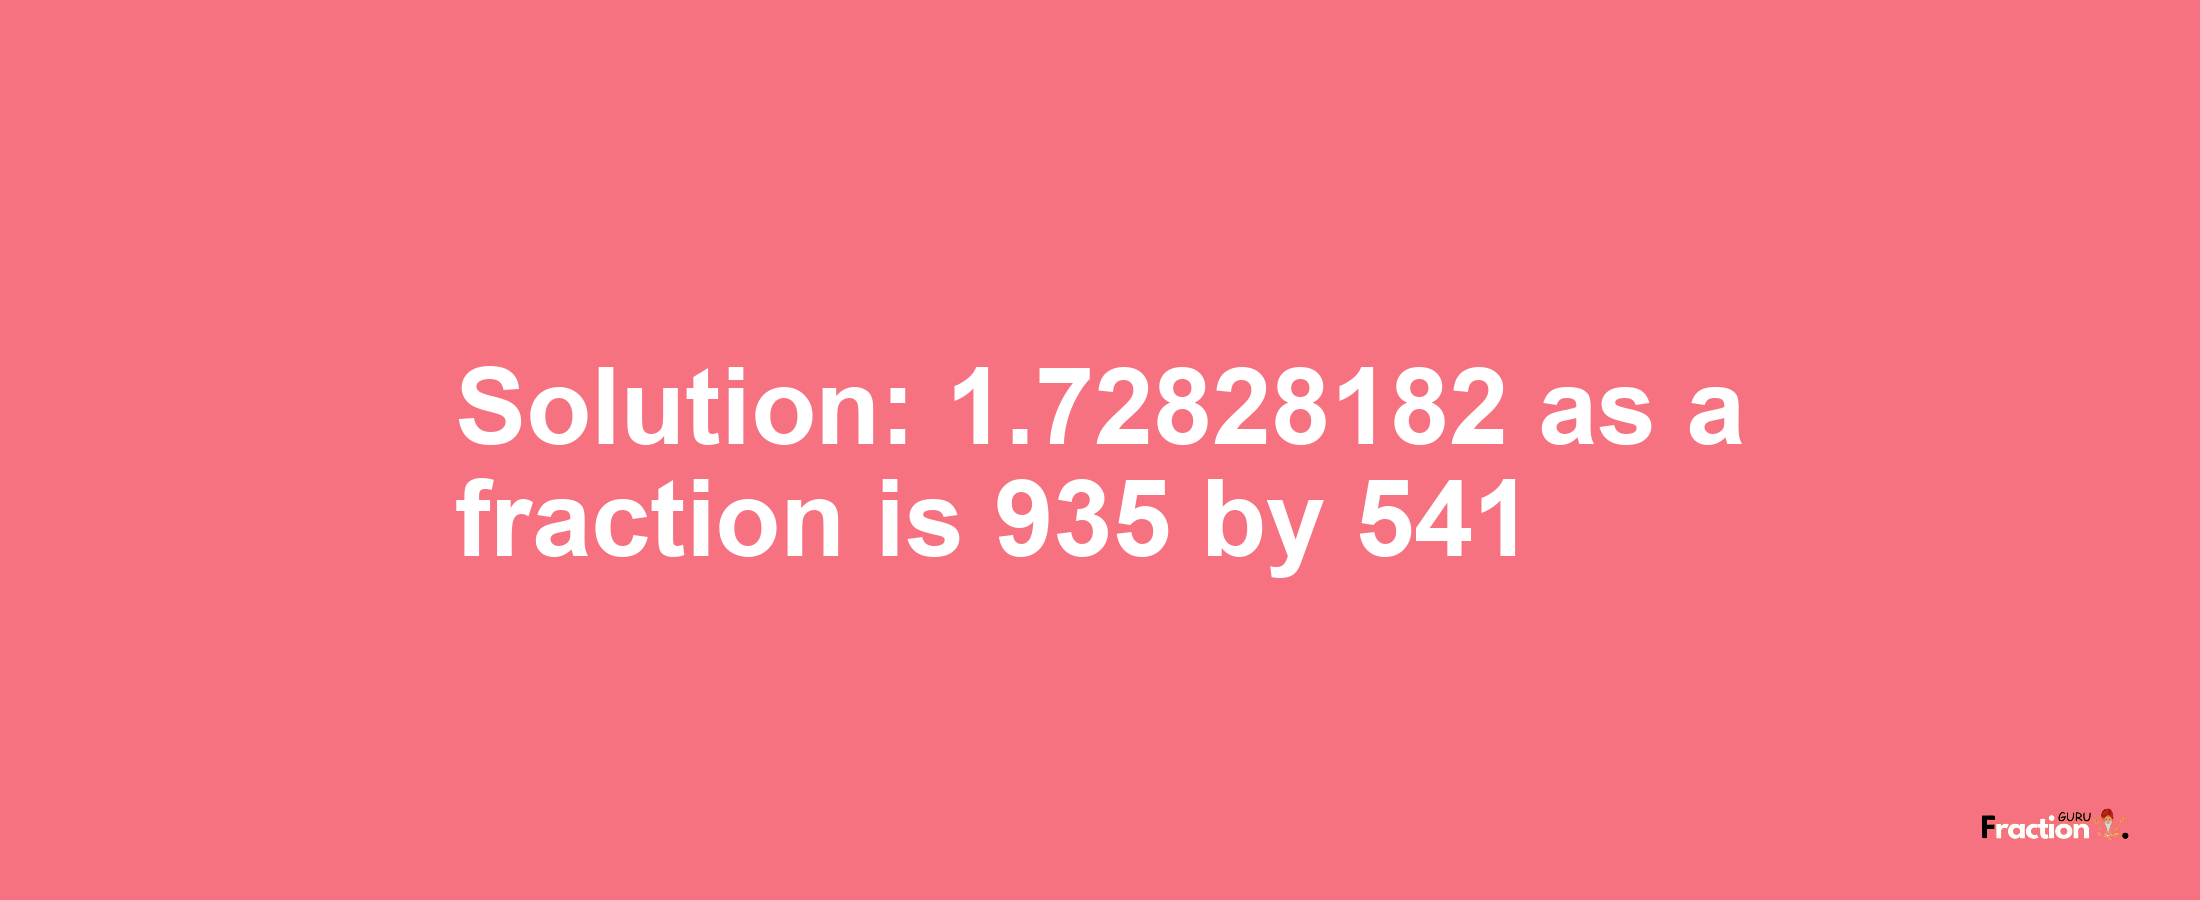 Solution:1.72828182 as a fraction is 935/541